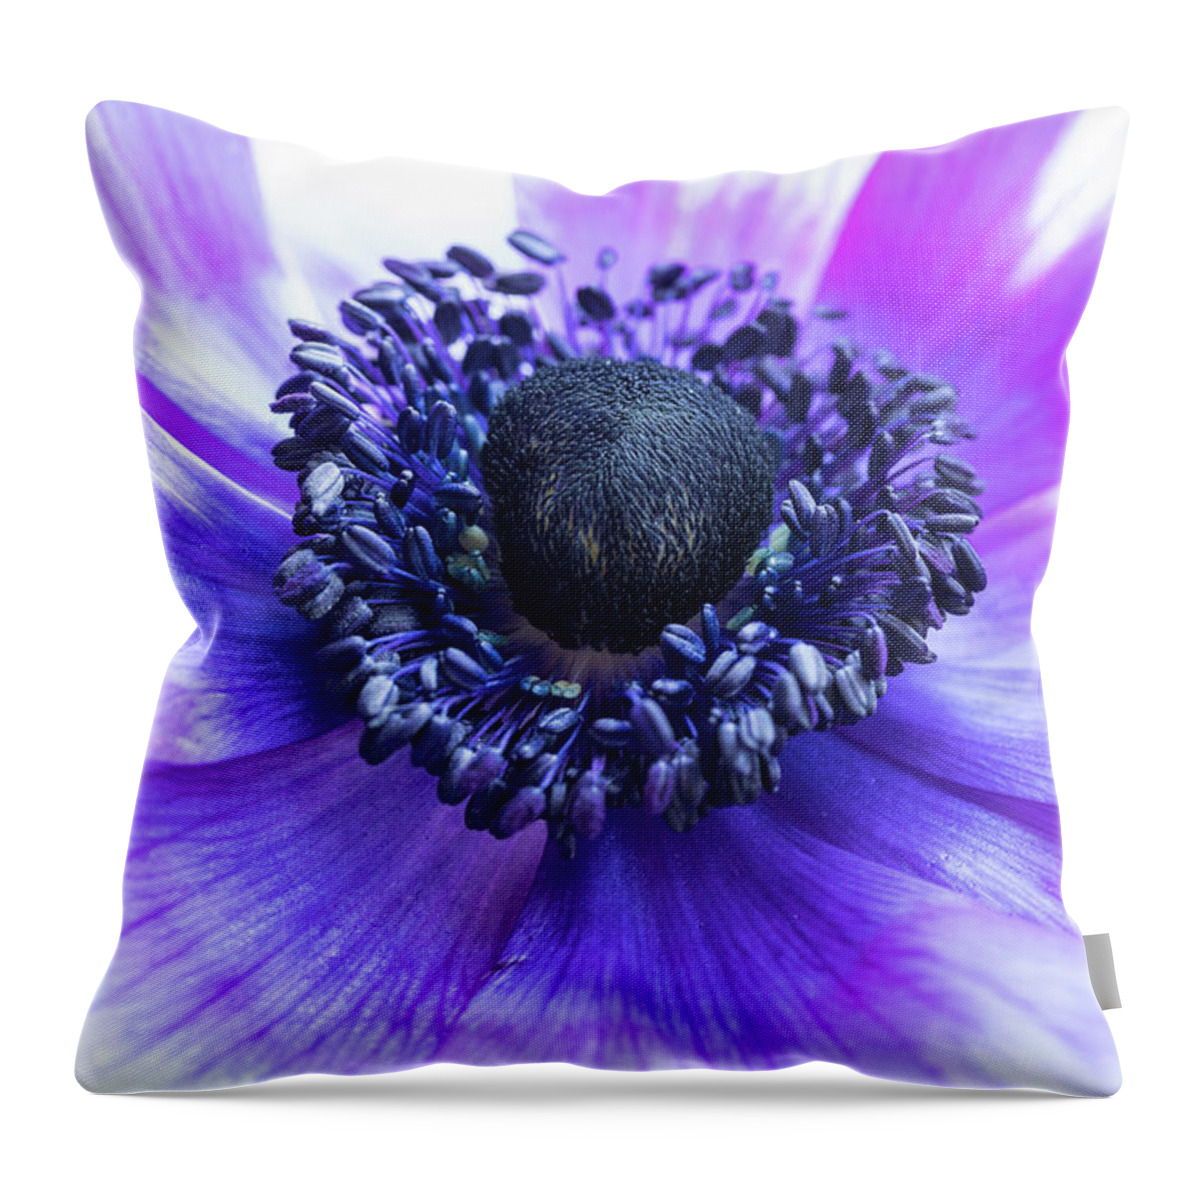 Anemone Throw Pillow featuring the photograph Purple Anemone by Kristen Wilkinson